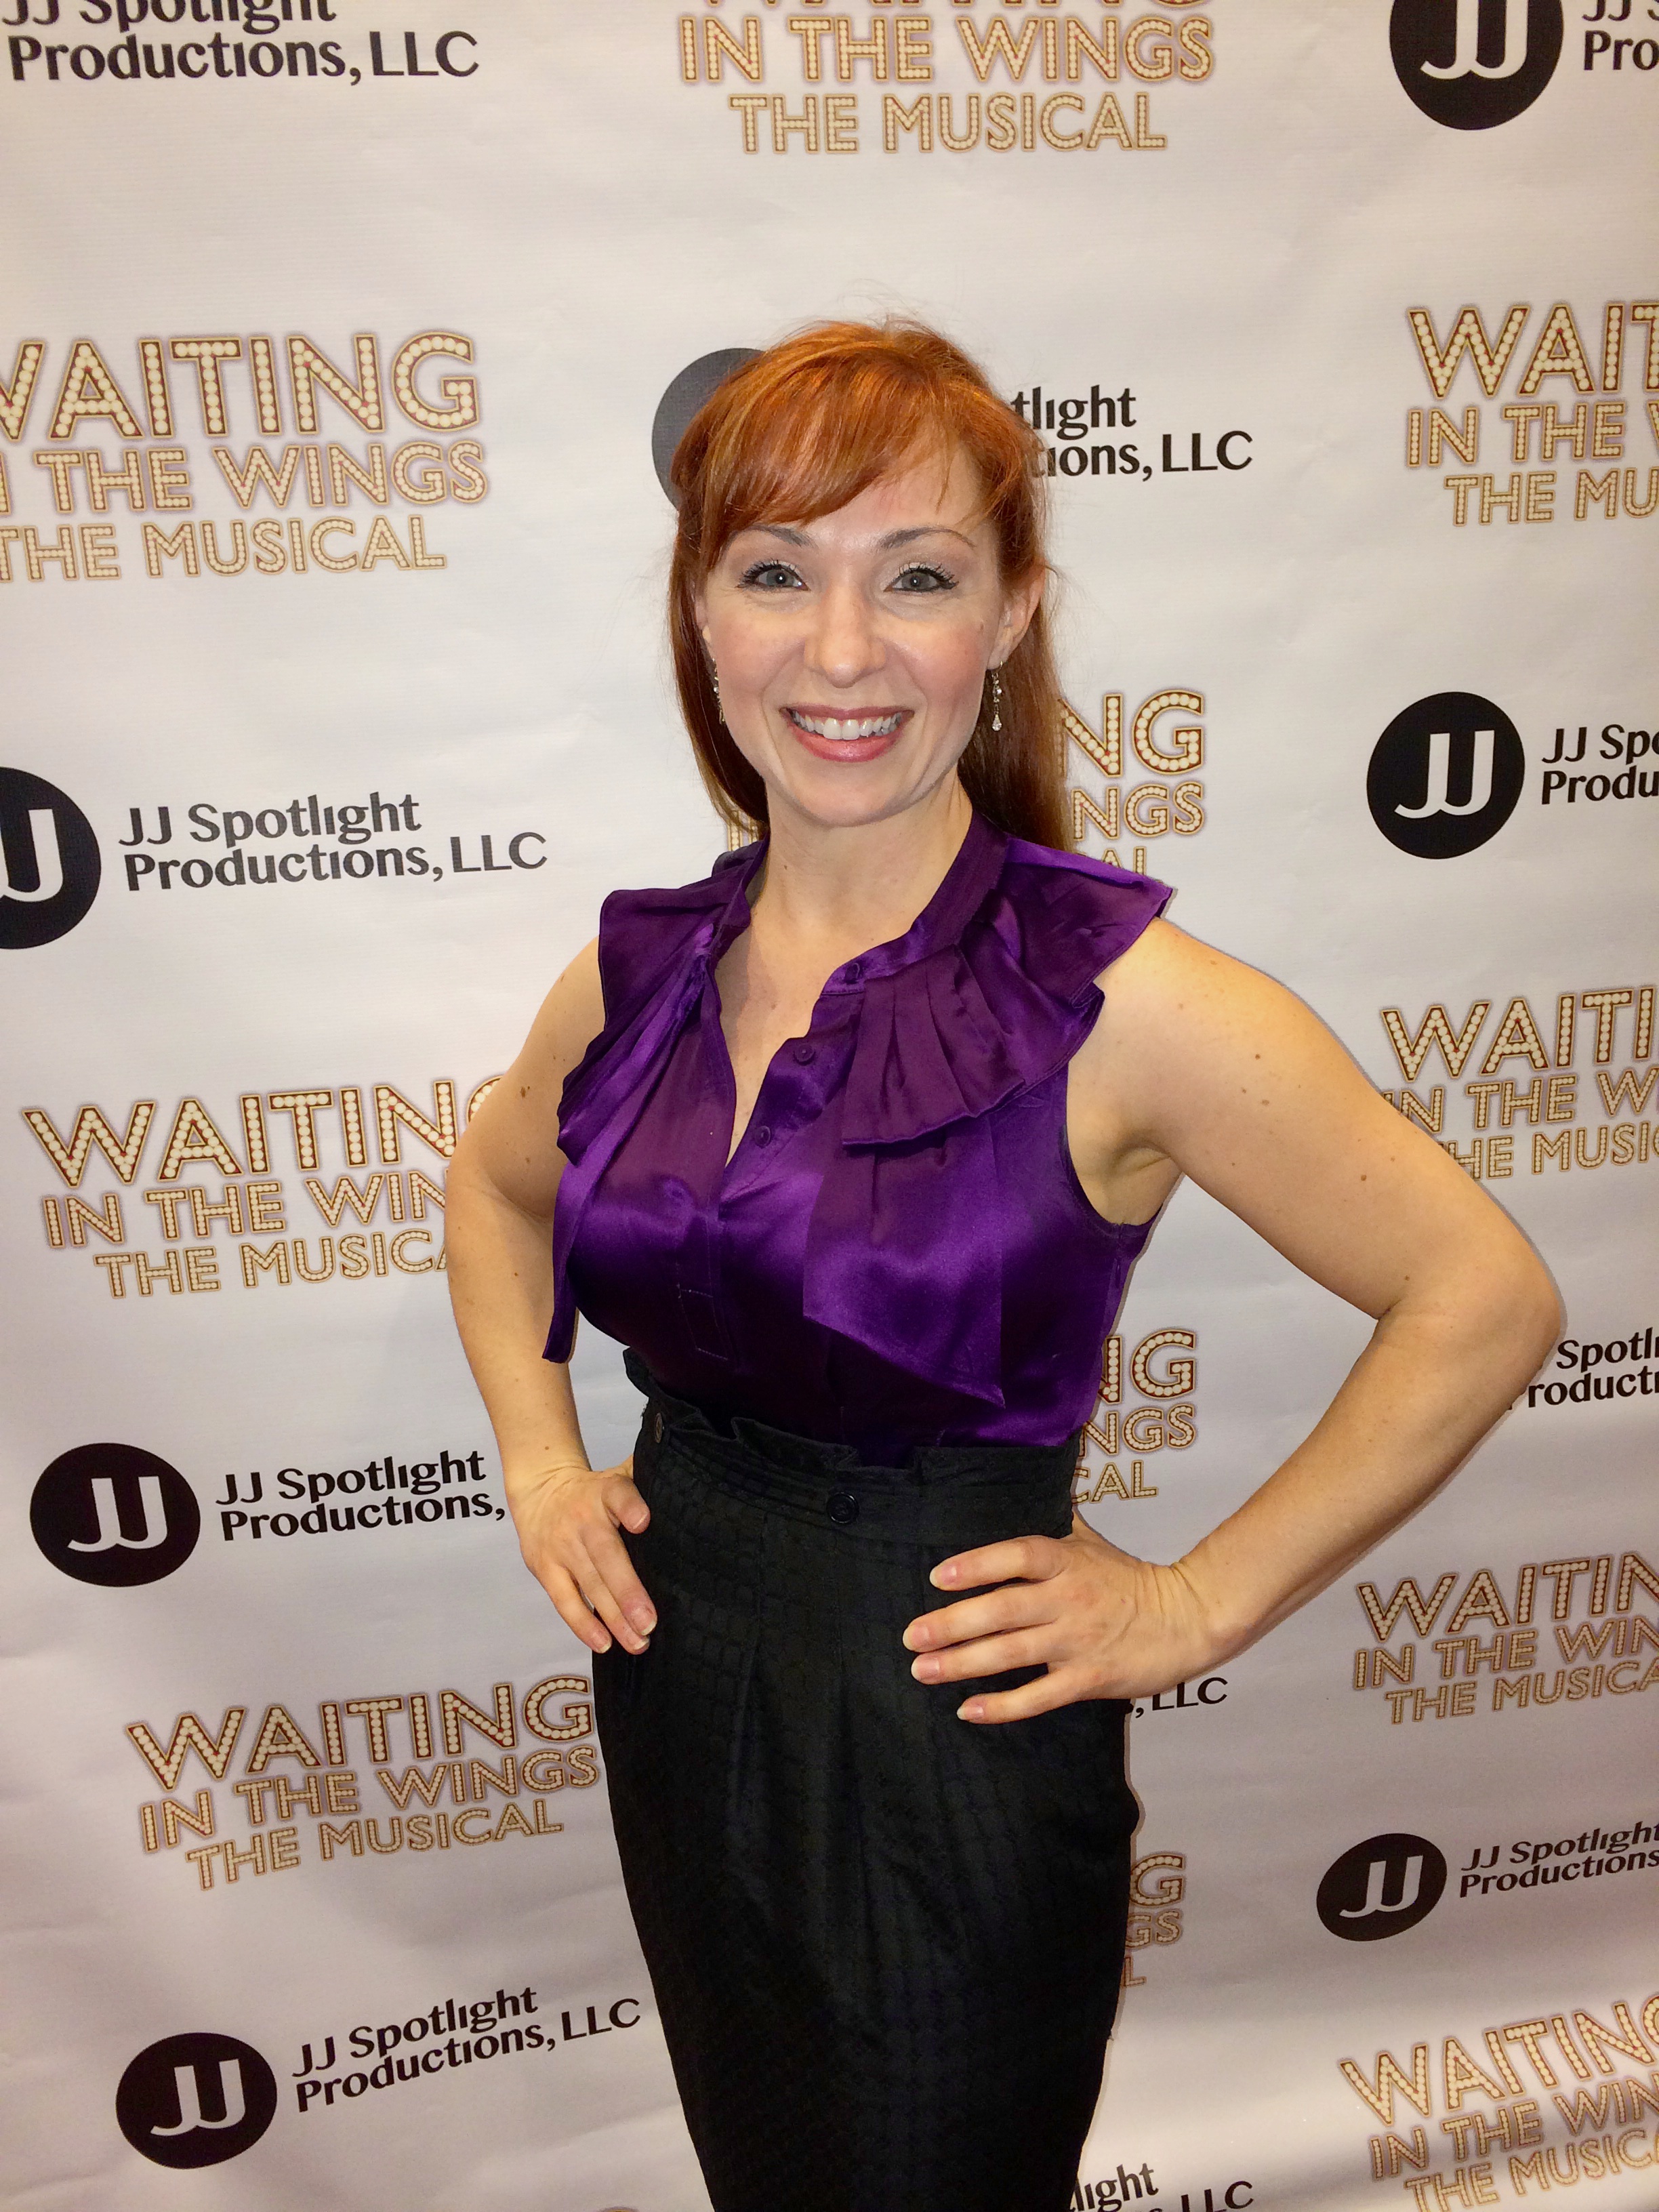 Christina Morrell at the screening of Waiting in the Wings